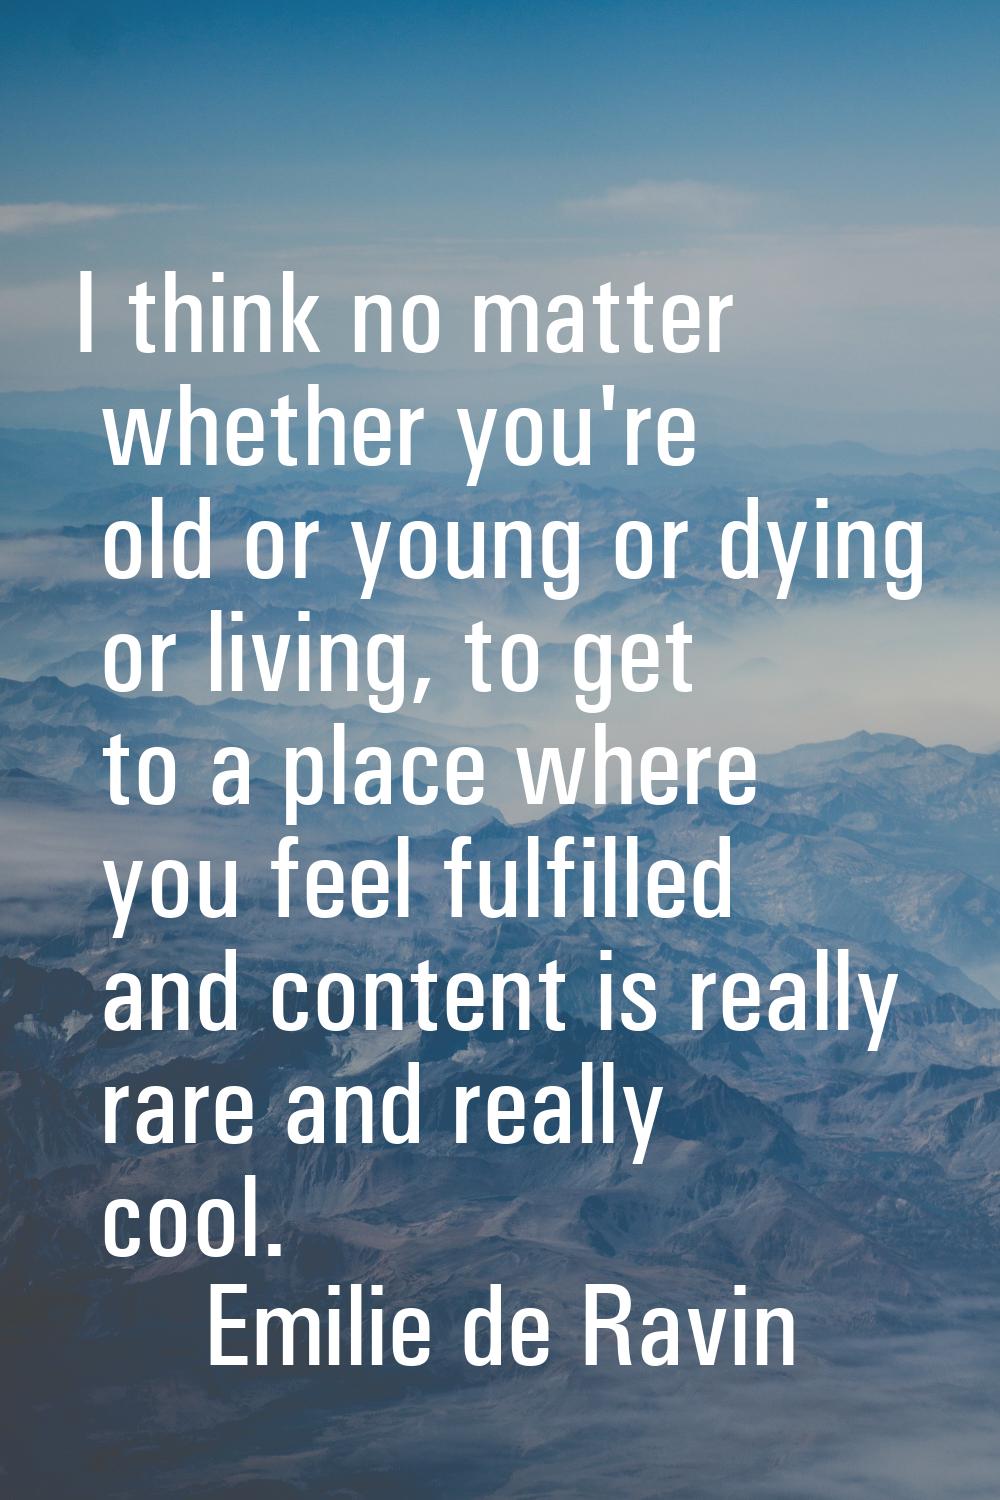 I think no matter whether you're old or young or dying or living, to get to a place where you feel 